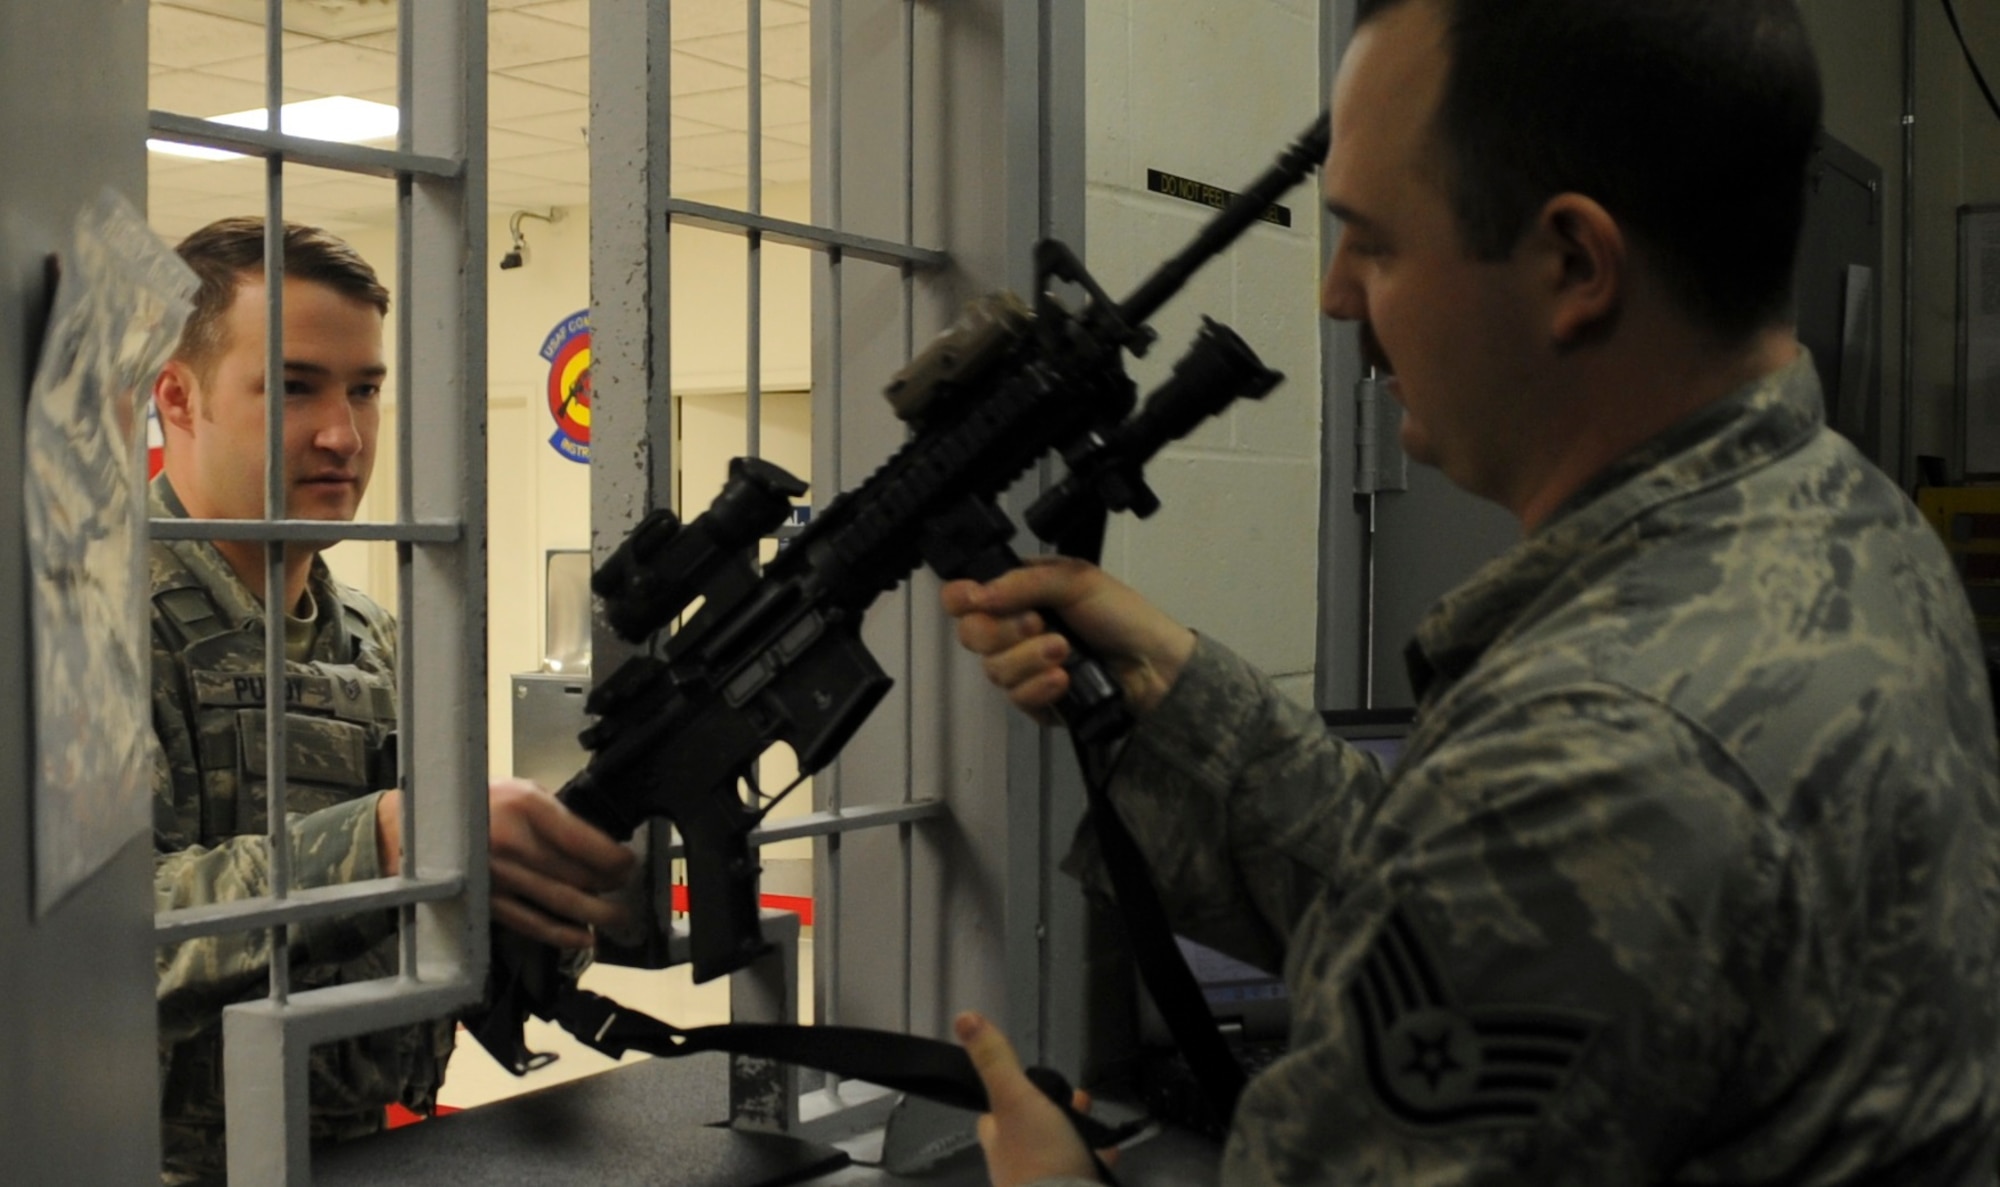 Staff Sgt. Kit Purty, Security Forces Squadron defender receives am M-4 carbine rifle from Staff Sgt. Jonathan Ginn, 92nd SFS armorer during a shift change arming at the armory at Fairchild Air Force Base, Washington, January 24, 2017.  Weapons in the armory are now checked out using an electronic tracking system that may save the 92nd SFS 750 man hours per year. (U.S. Air Force photo/ Airman 1st Class Sean Campbell)